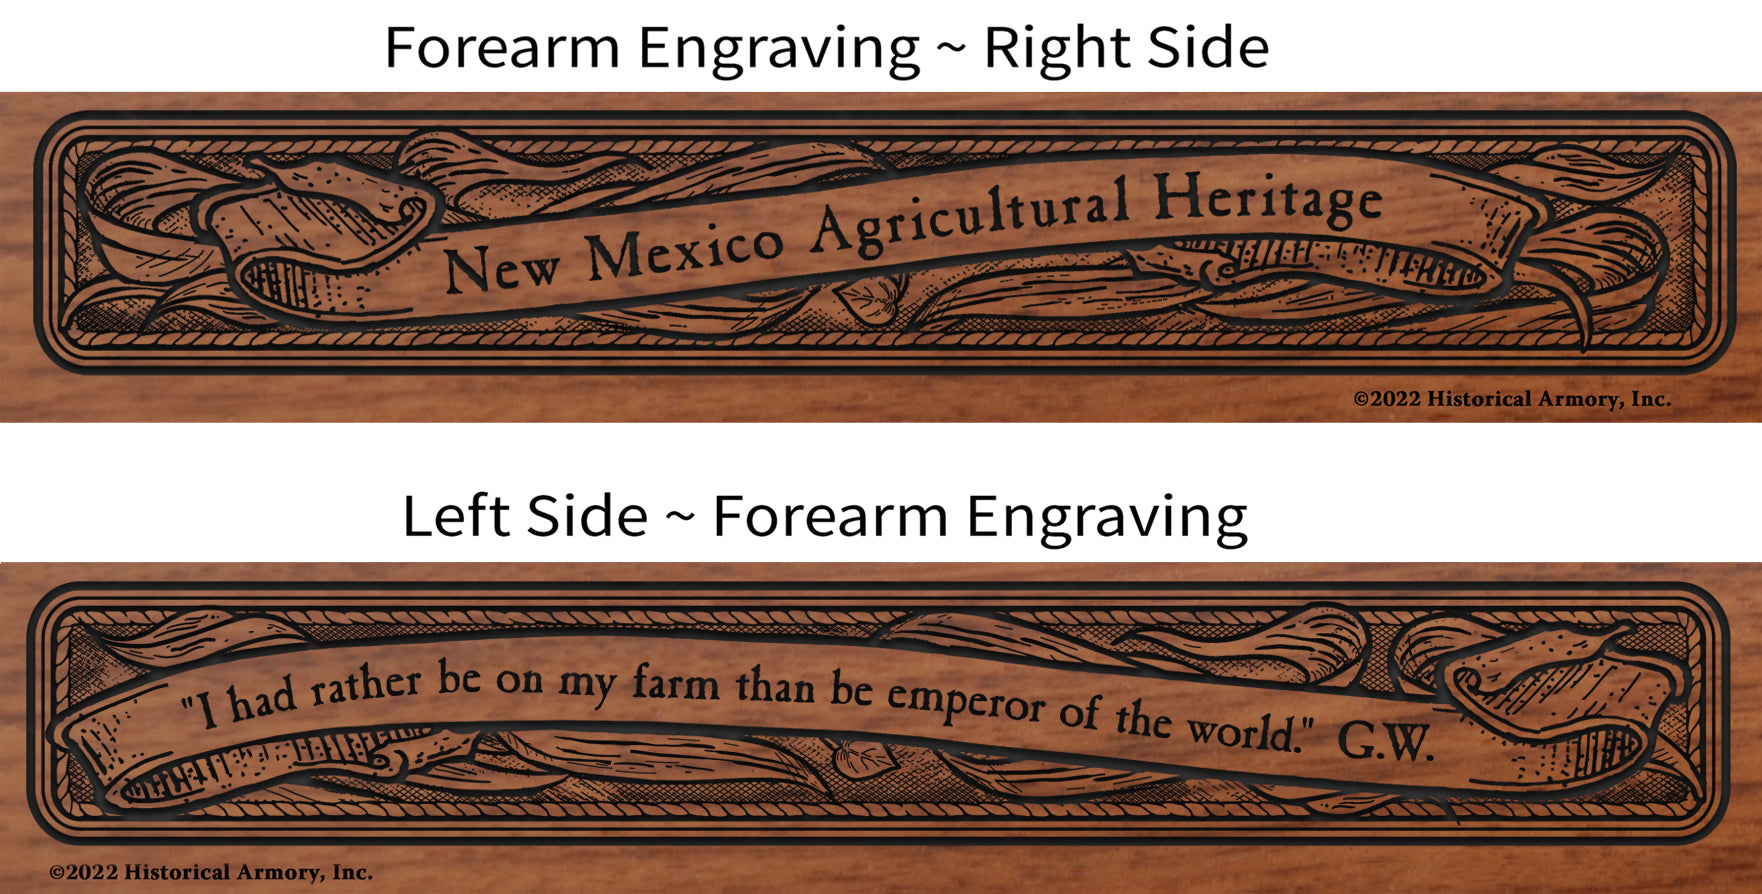 New Mexico Agricultural Heritage Engraved Rifle Forearm